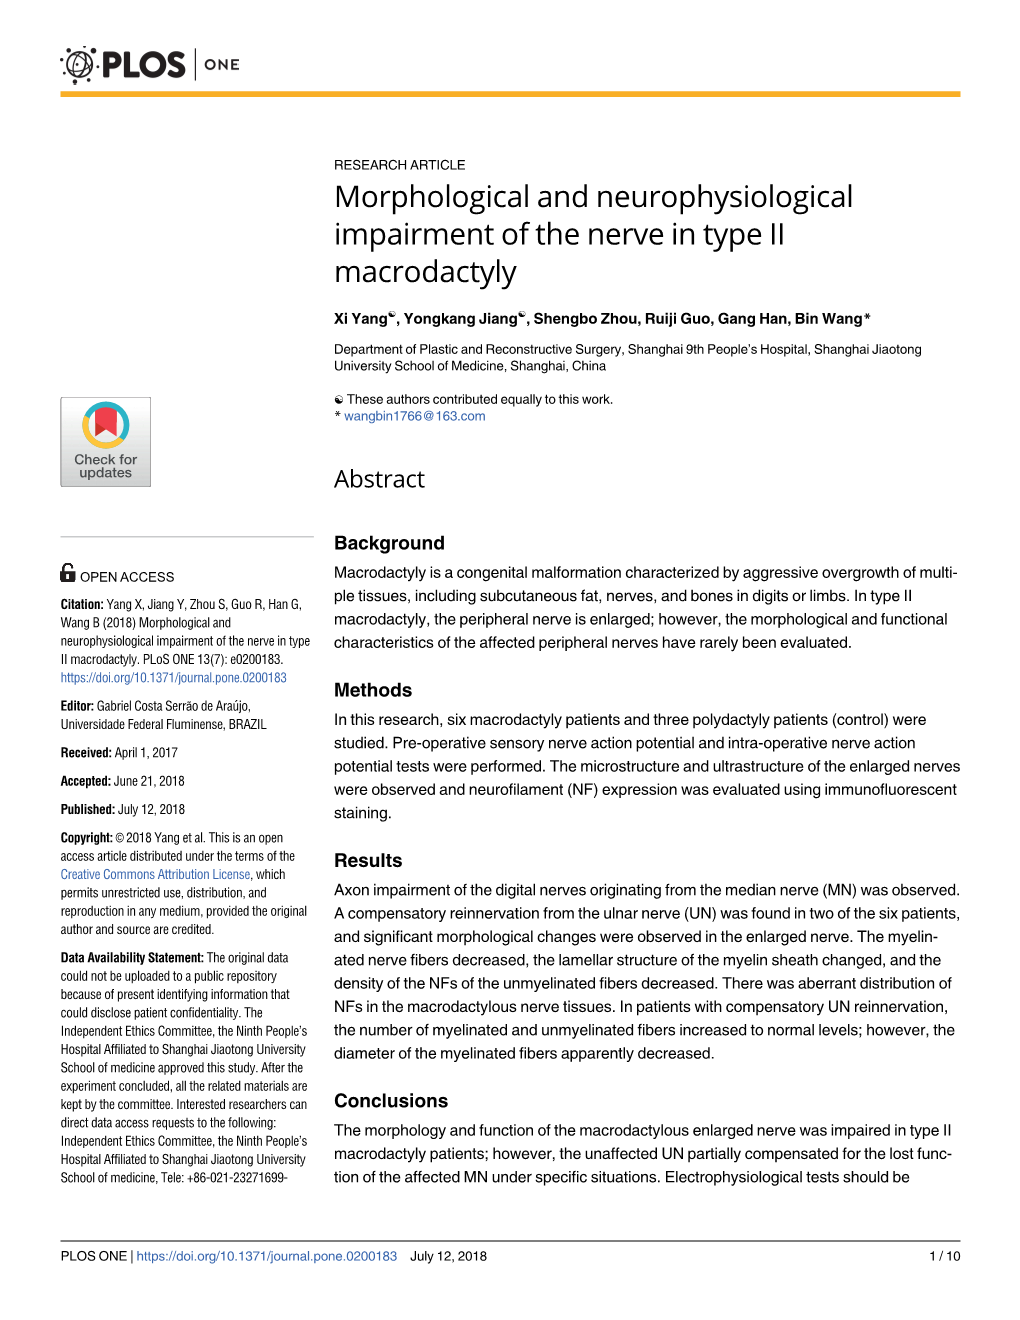 Morphological and Neurophysiological Impairment of the Nerve in Type II Macrodactyly